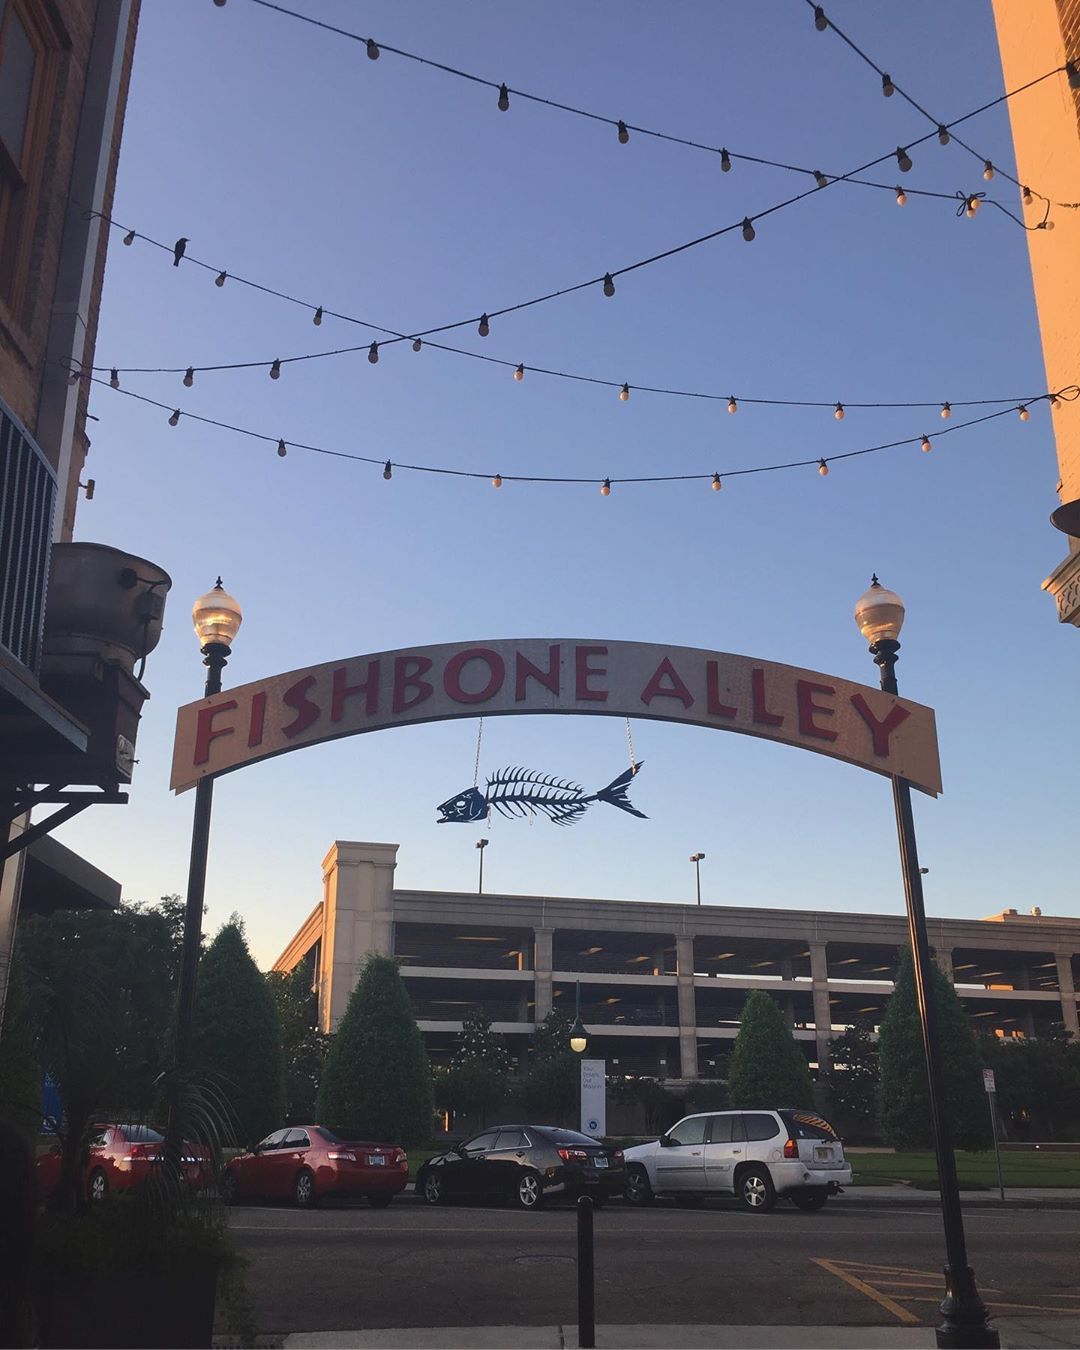 JustAdddWater — at Fishbone Alley Downtown Gulfport...